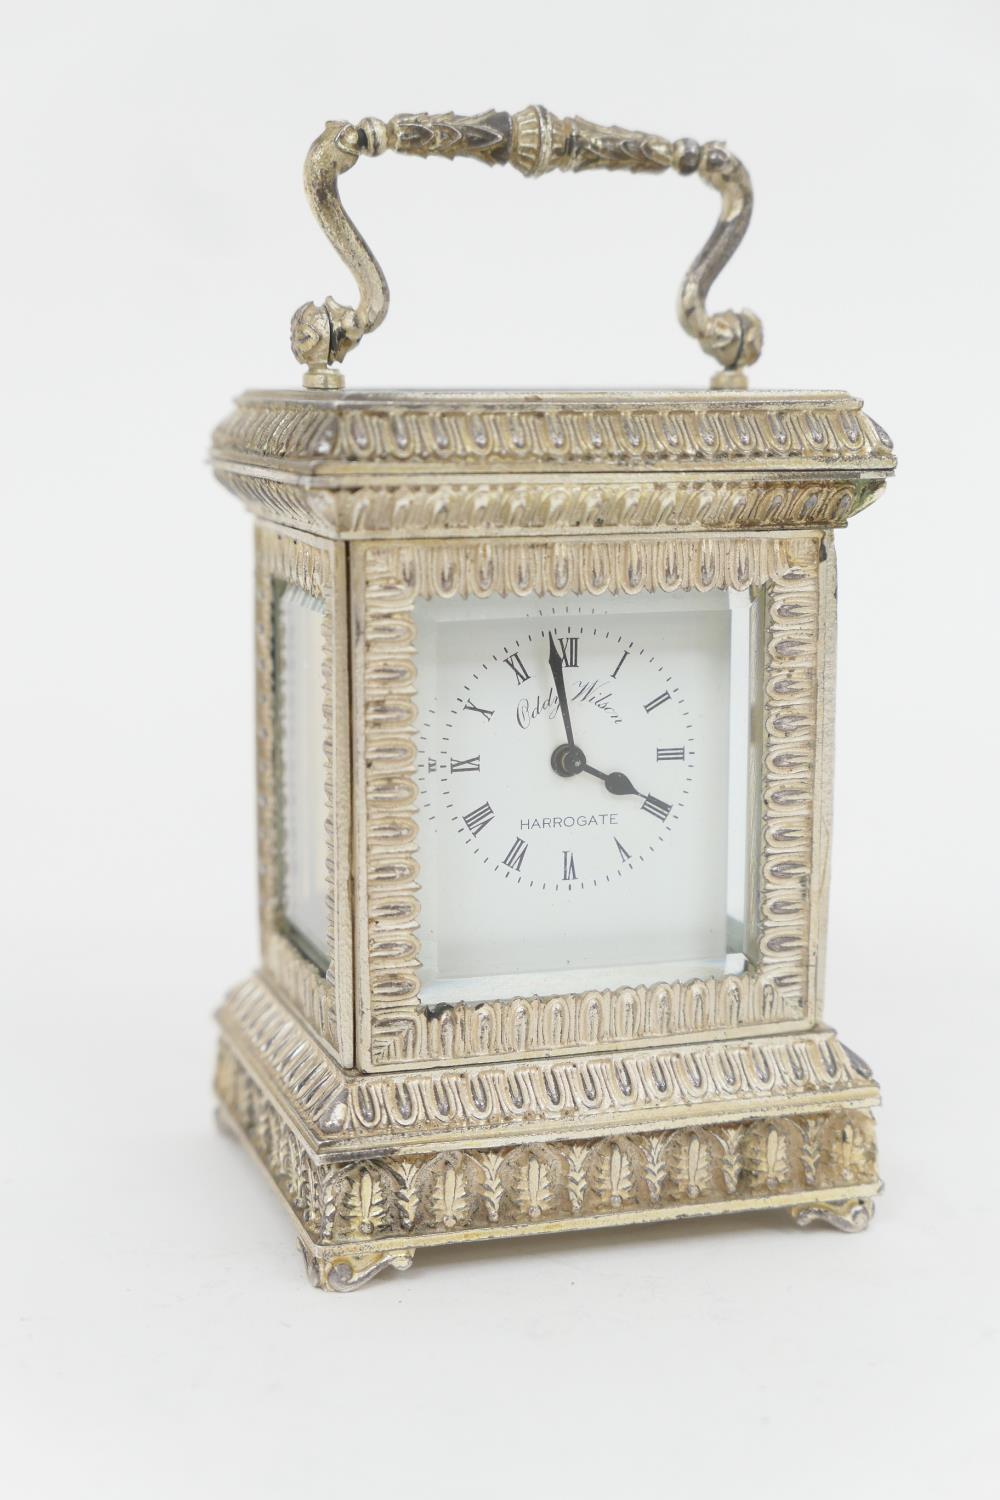 Silver miniature carriage timepiece, hallmarked London 1978, white dial signed 'Oddy Wilson,